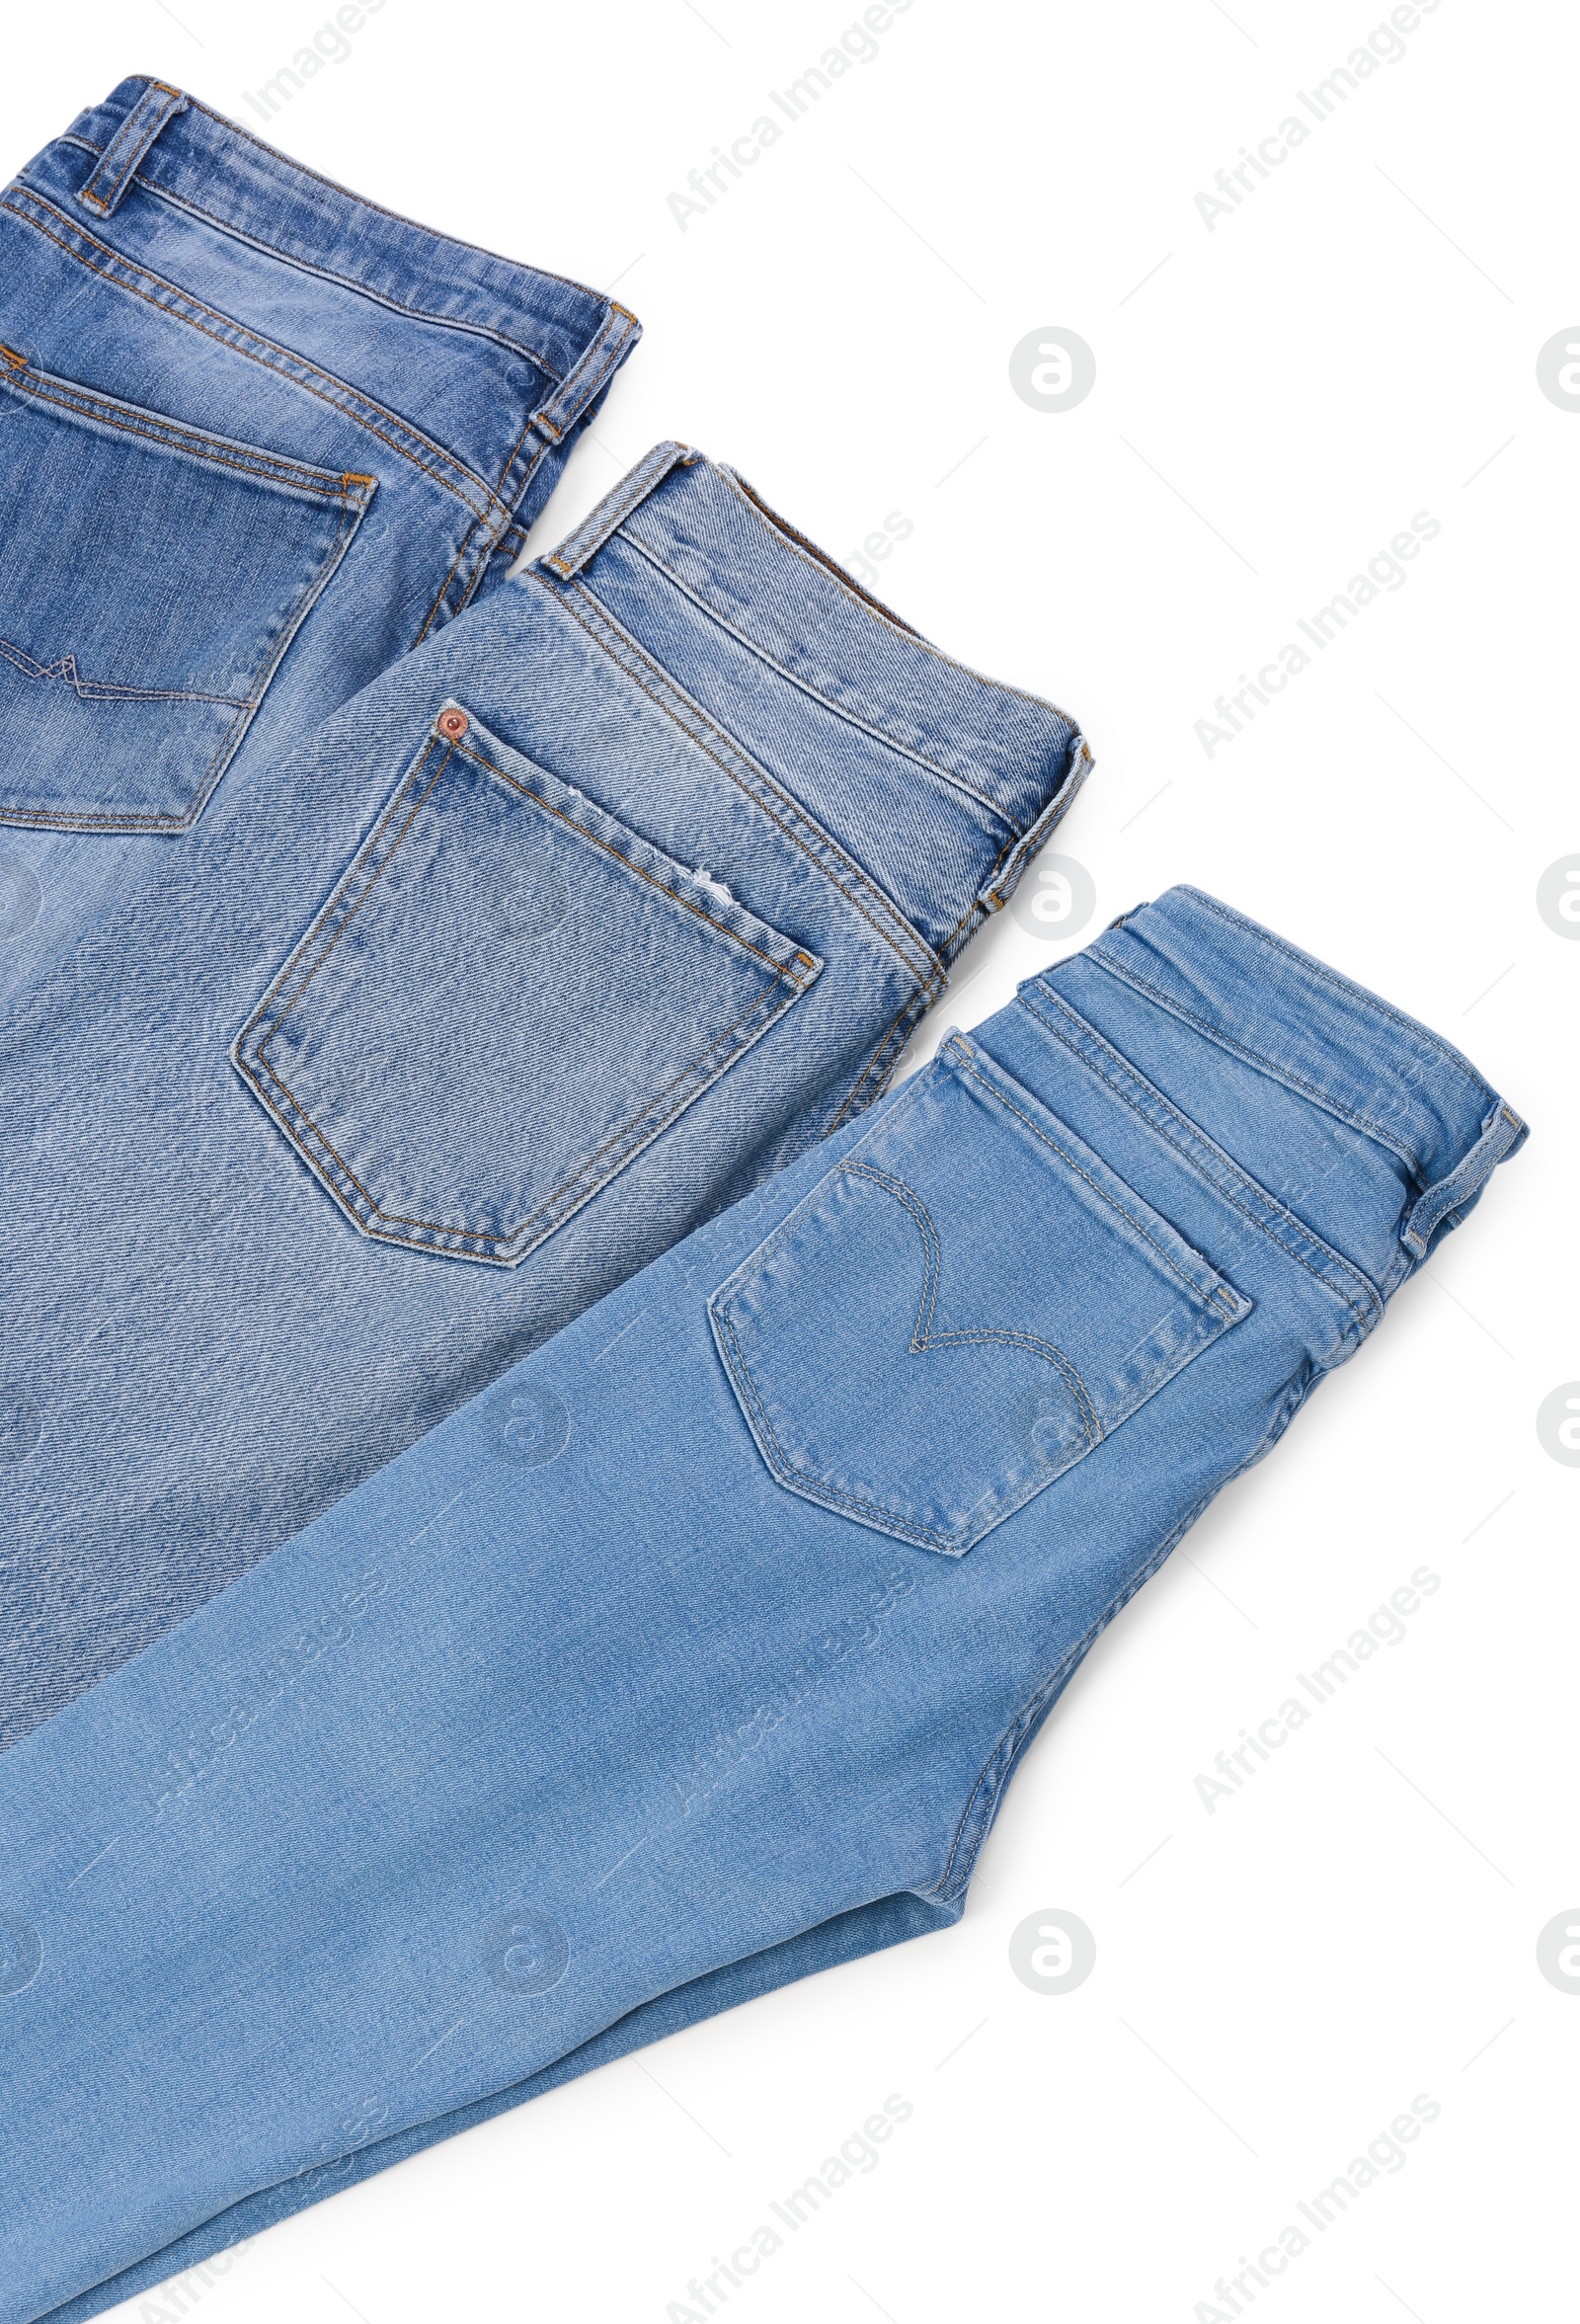 Photo of Different stylish jeans isolated on white, above view